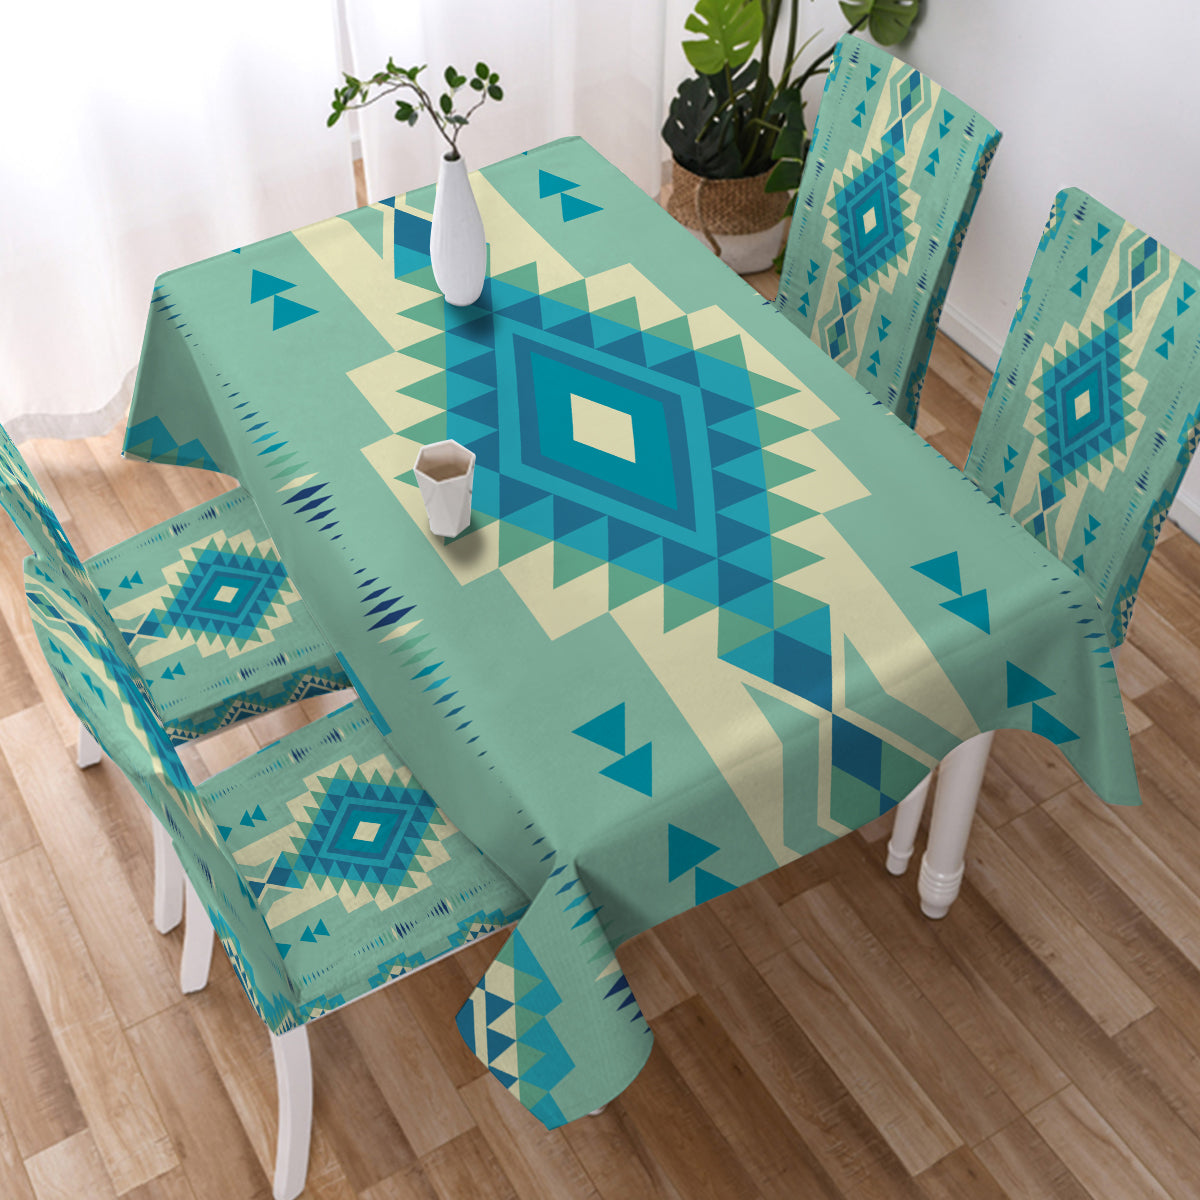 Powwow Store gb nat00599 pattern ethnic native tablecloth